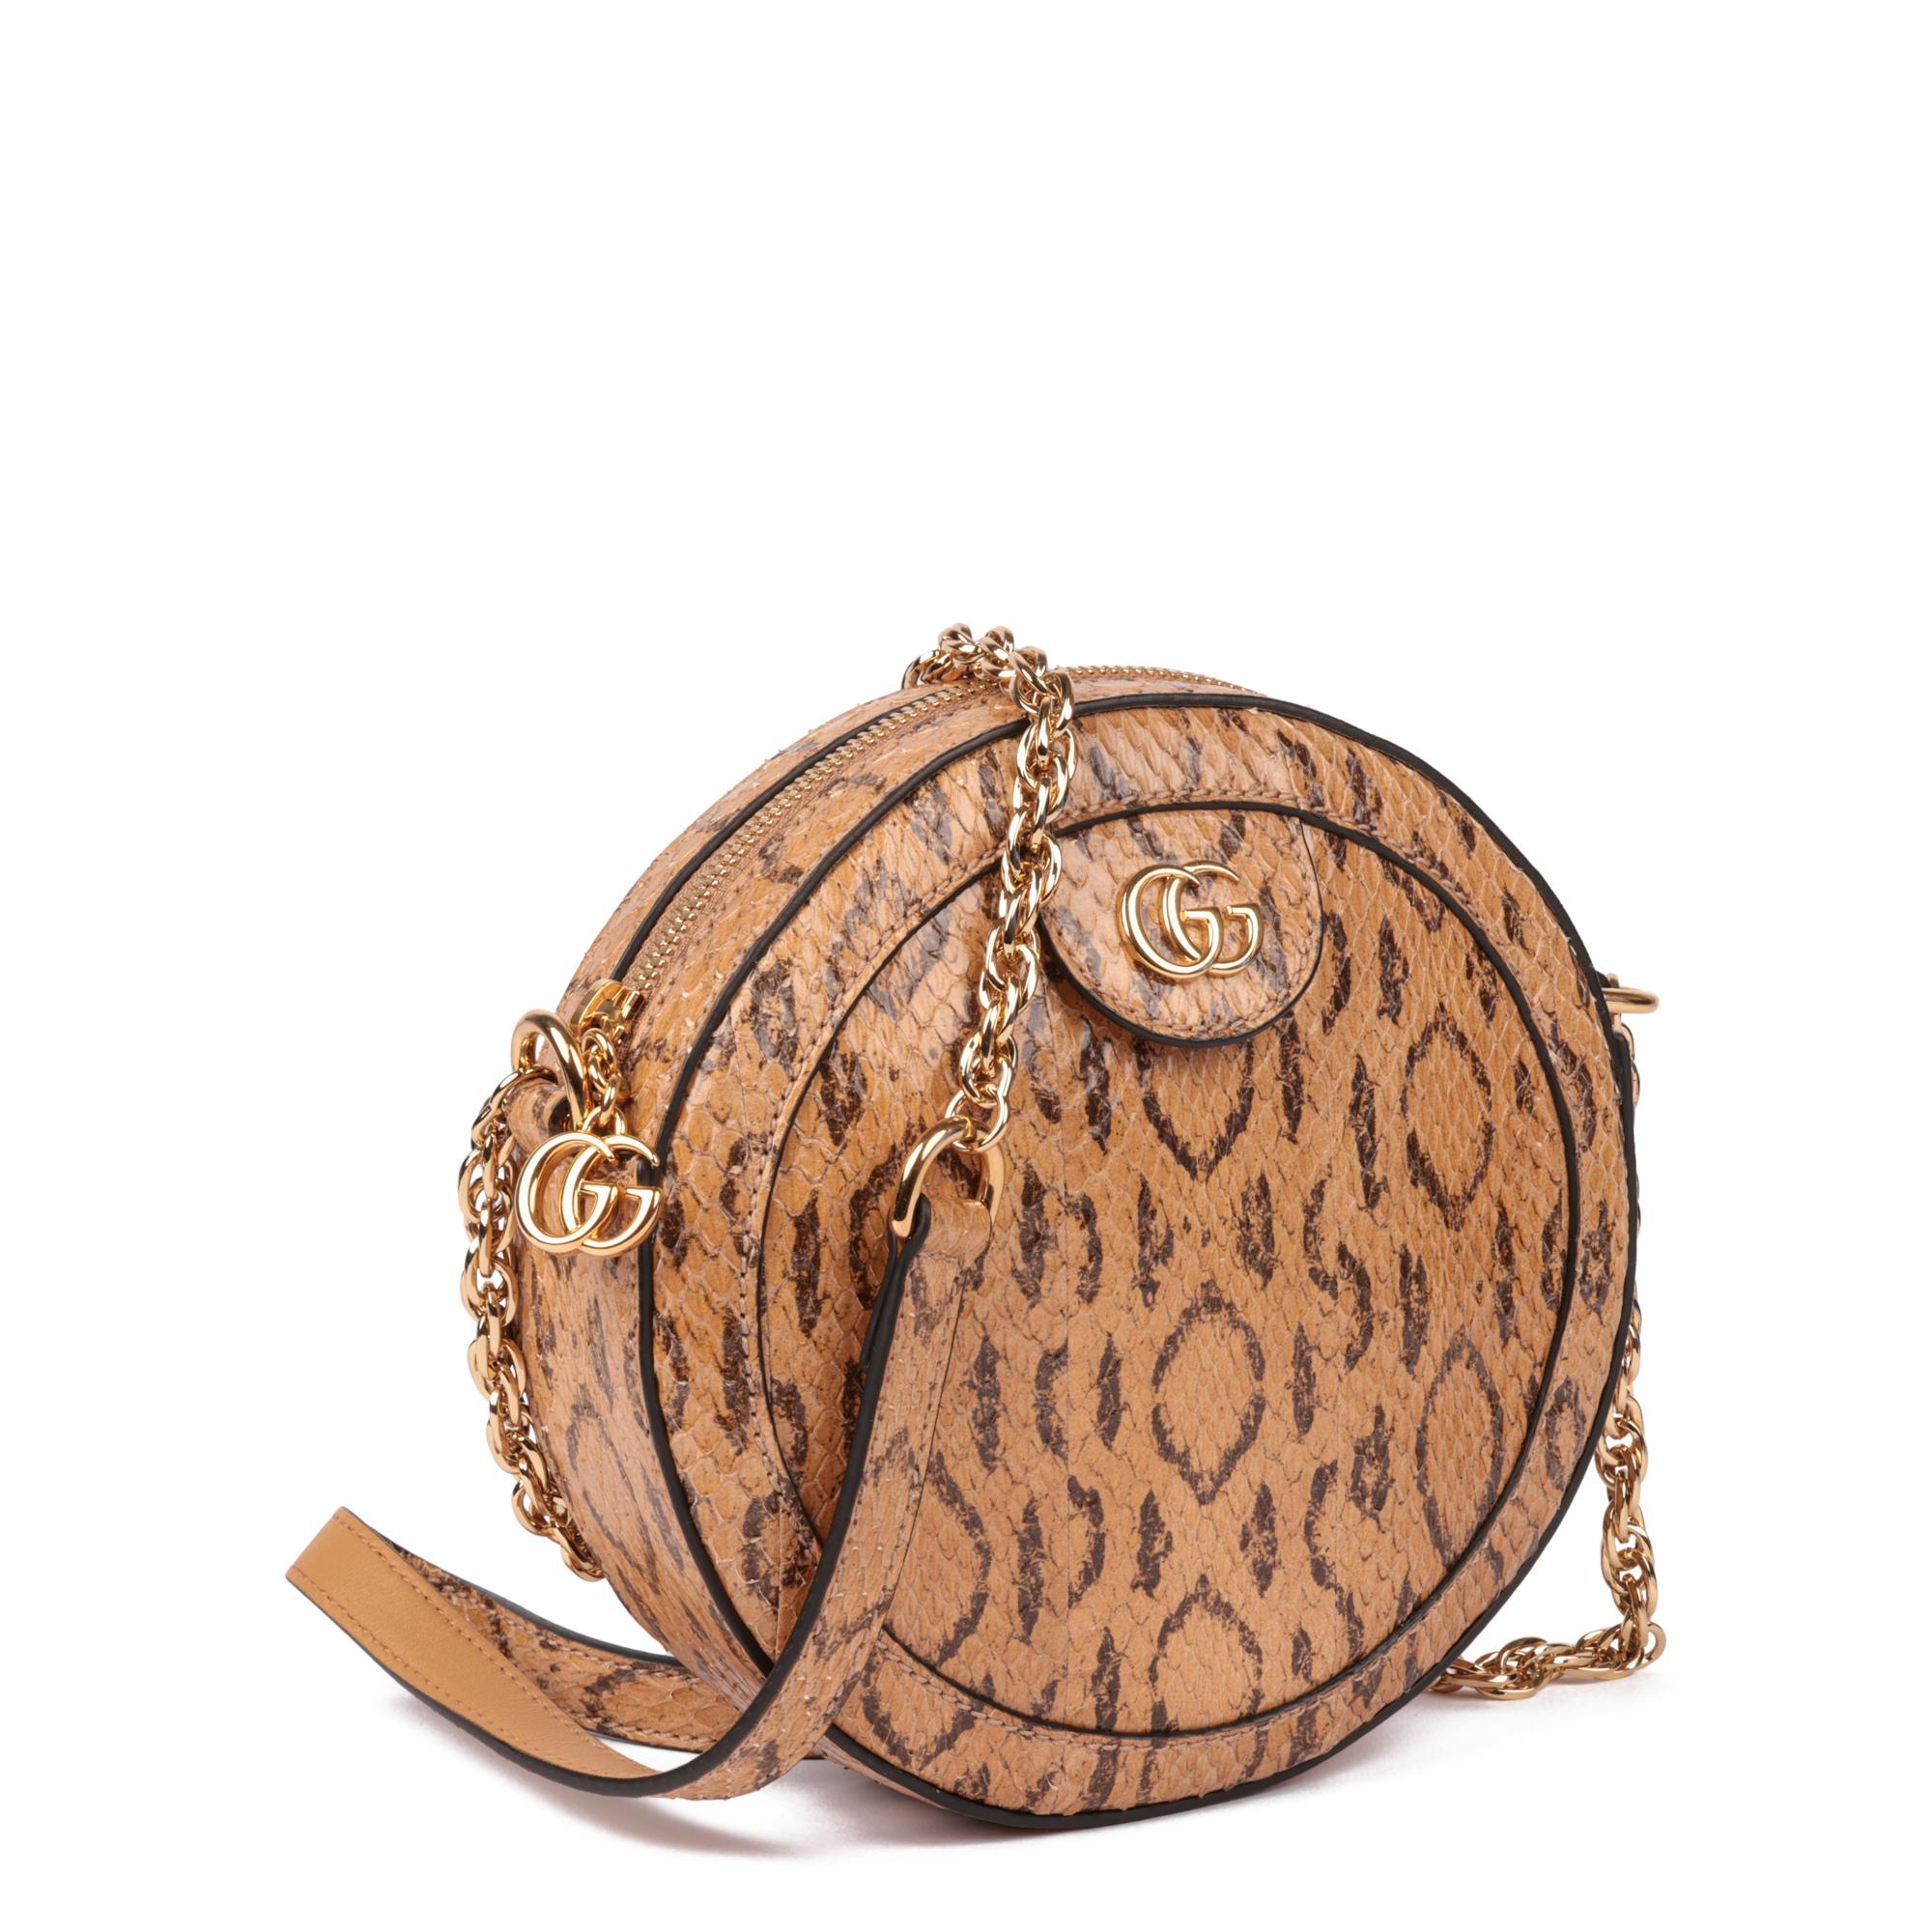 GUCCI
Caramel Python Leather Mini Round Ophidia Shoulder Bag

Xupes Reference: HB5220
Serial Number: 550613 520981
Age (Circa): 2022
Accompanied By: Gucci Dust Bag, Care Booklet
Authenticity Details: Date Stamp (Made in Italy)
Gender: Ladies
Type: